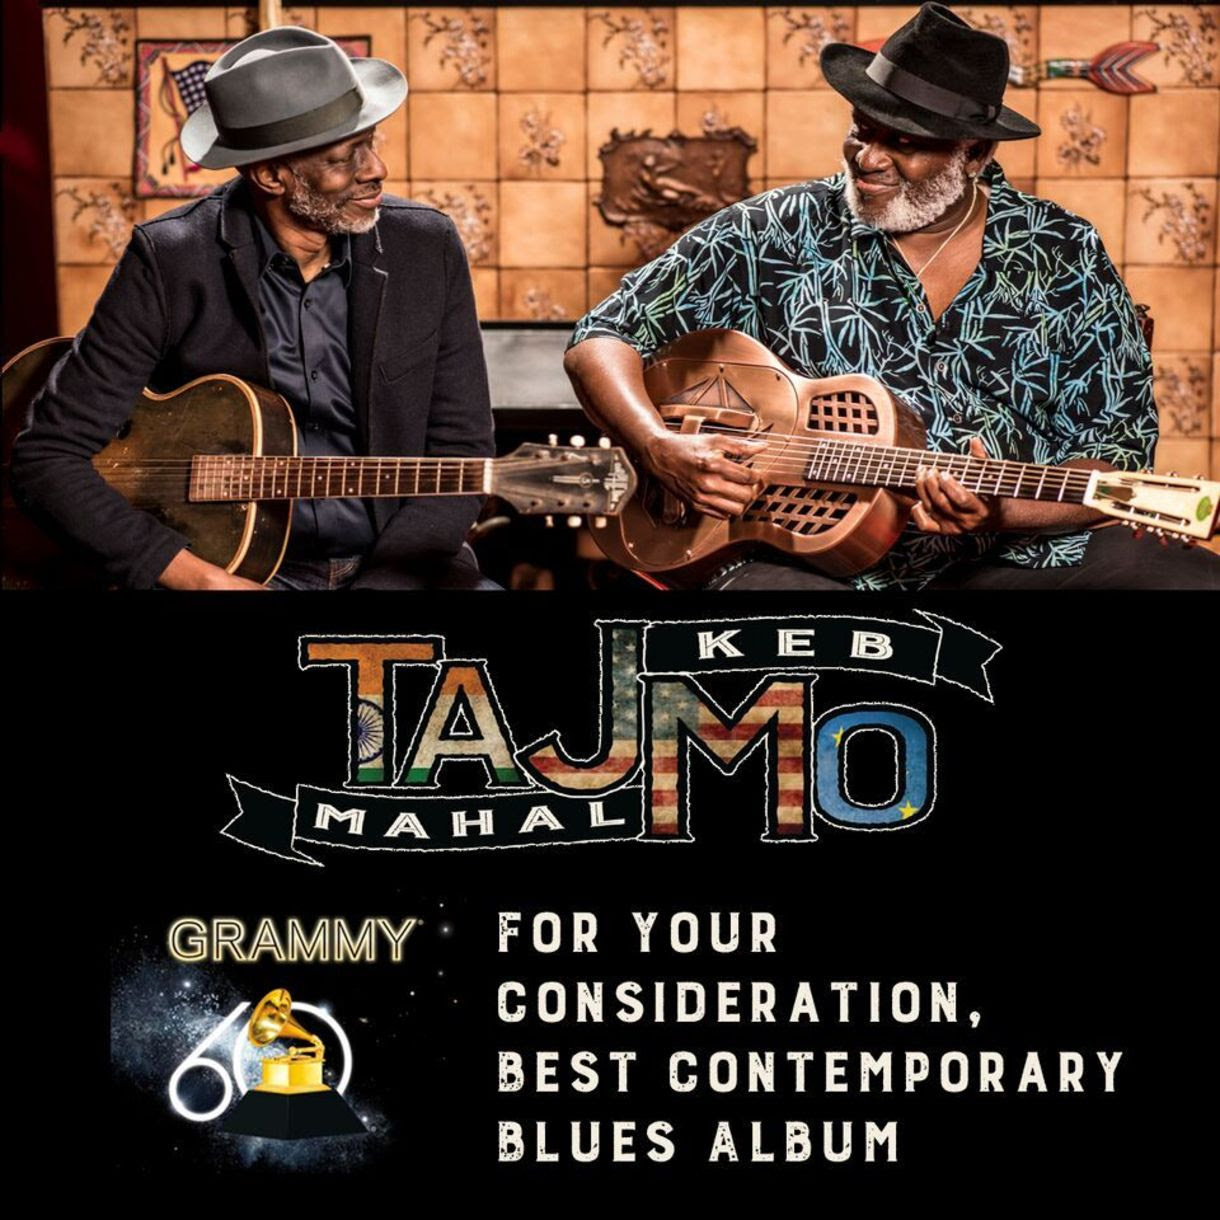 FOR YOUR CONSIDERATION TAJMO for Best Contemporary Blues Album